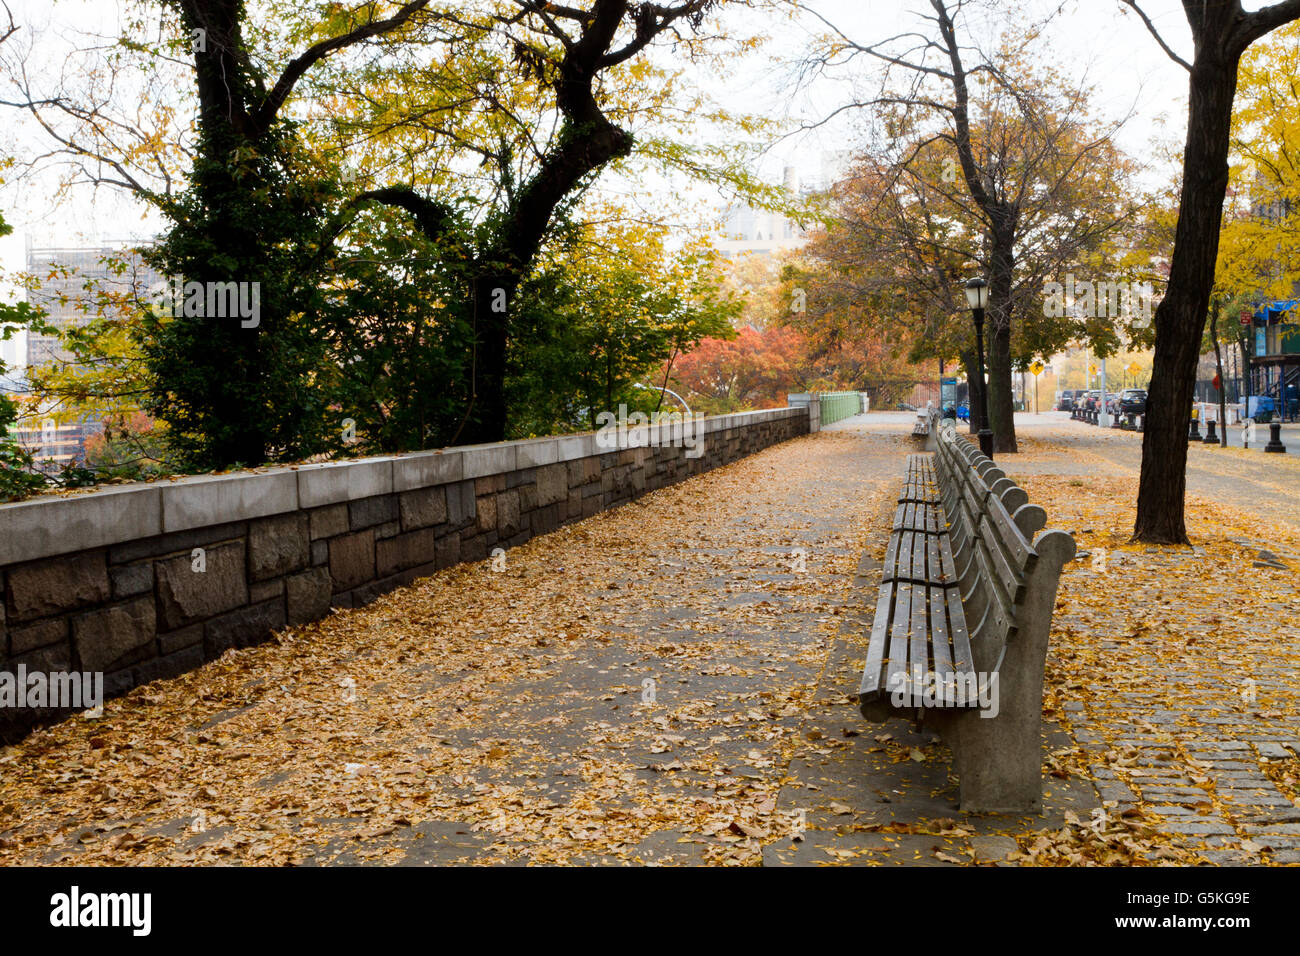 Park bench photography - and Alamy nyc stock hi-res images